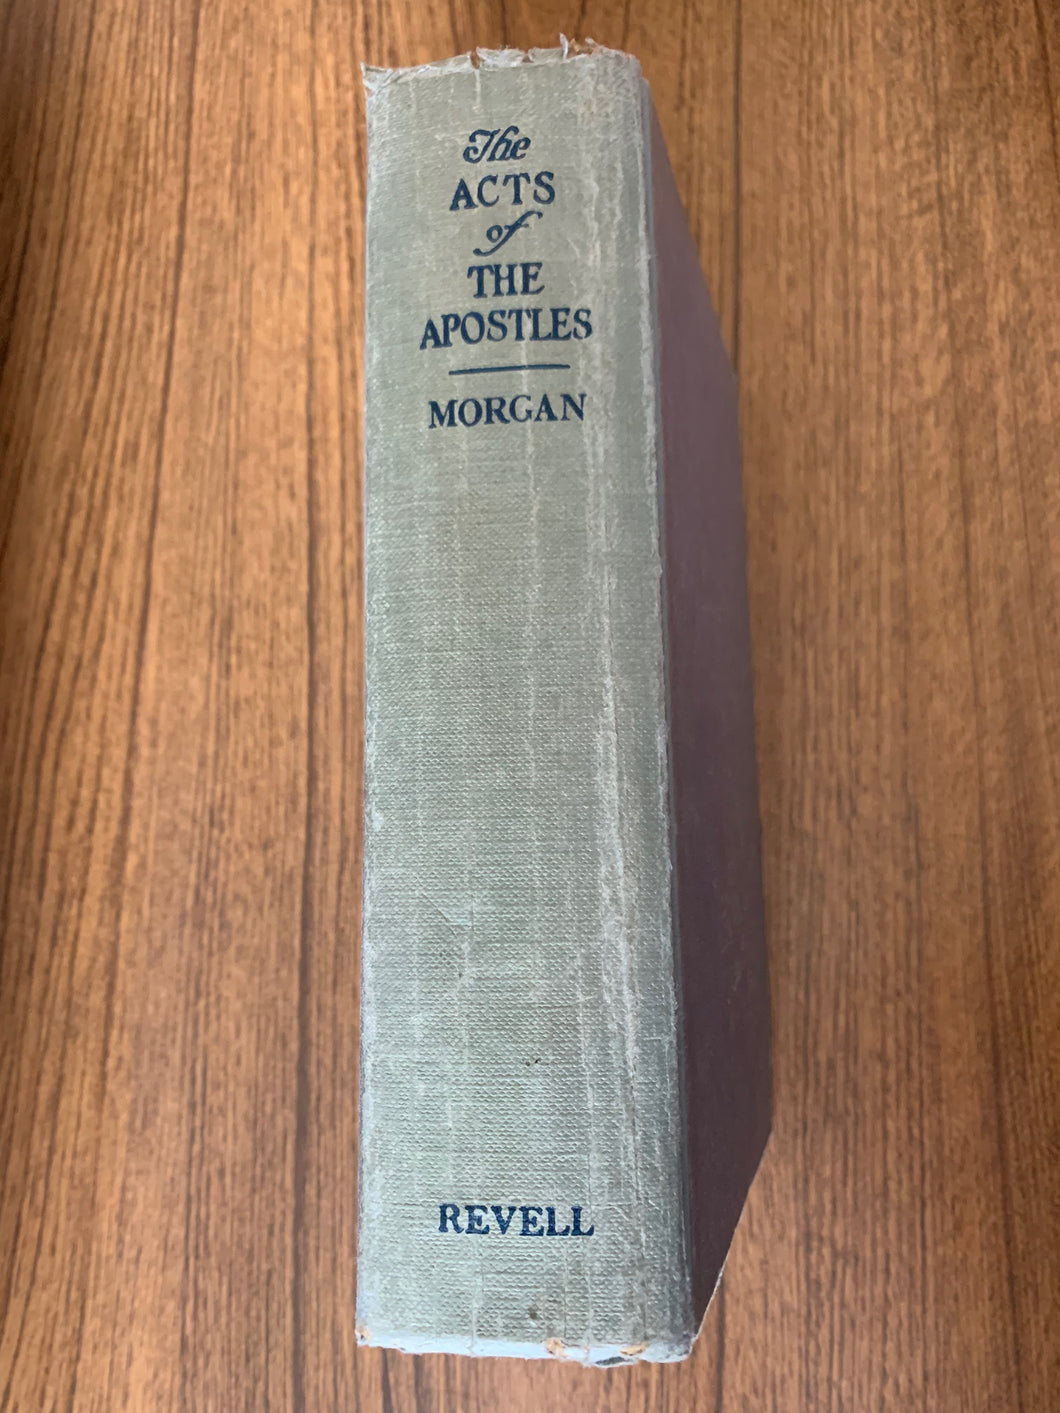 The Acts of The Apostles by G. Campbell Morgan